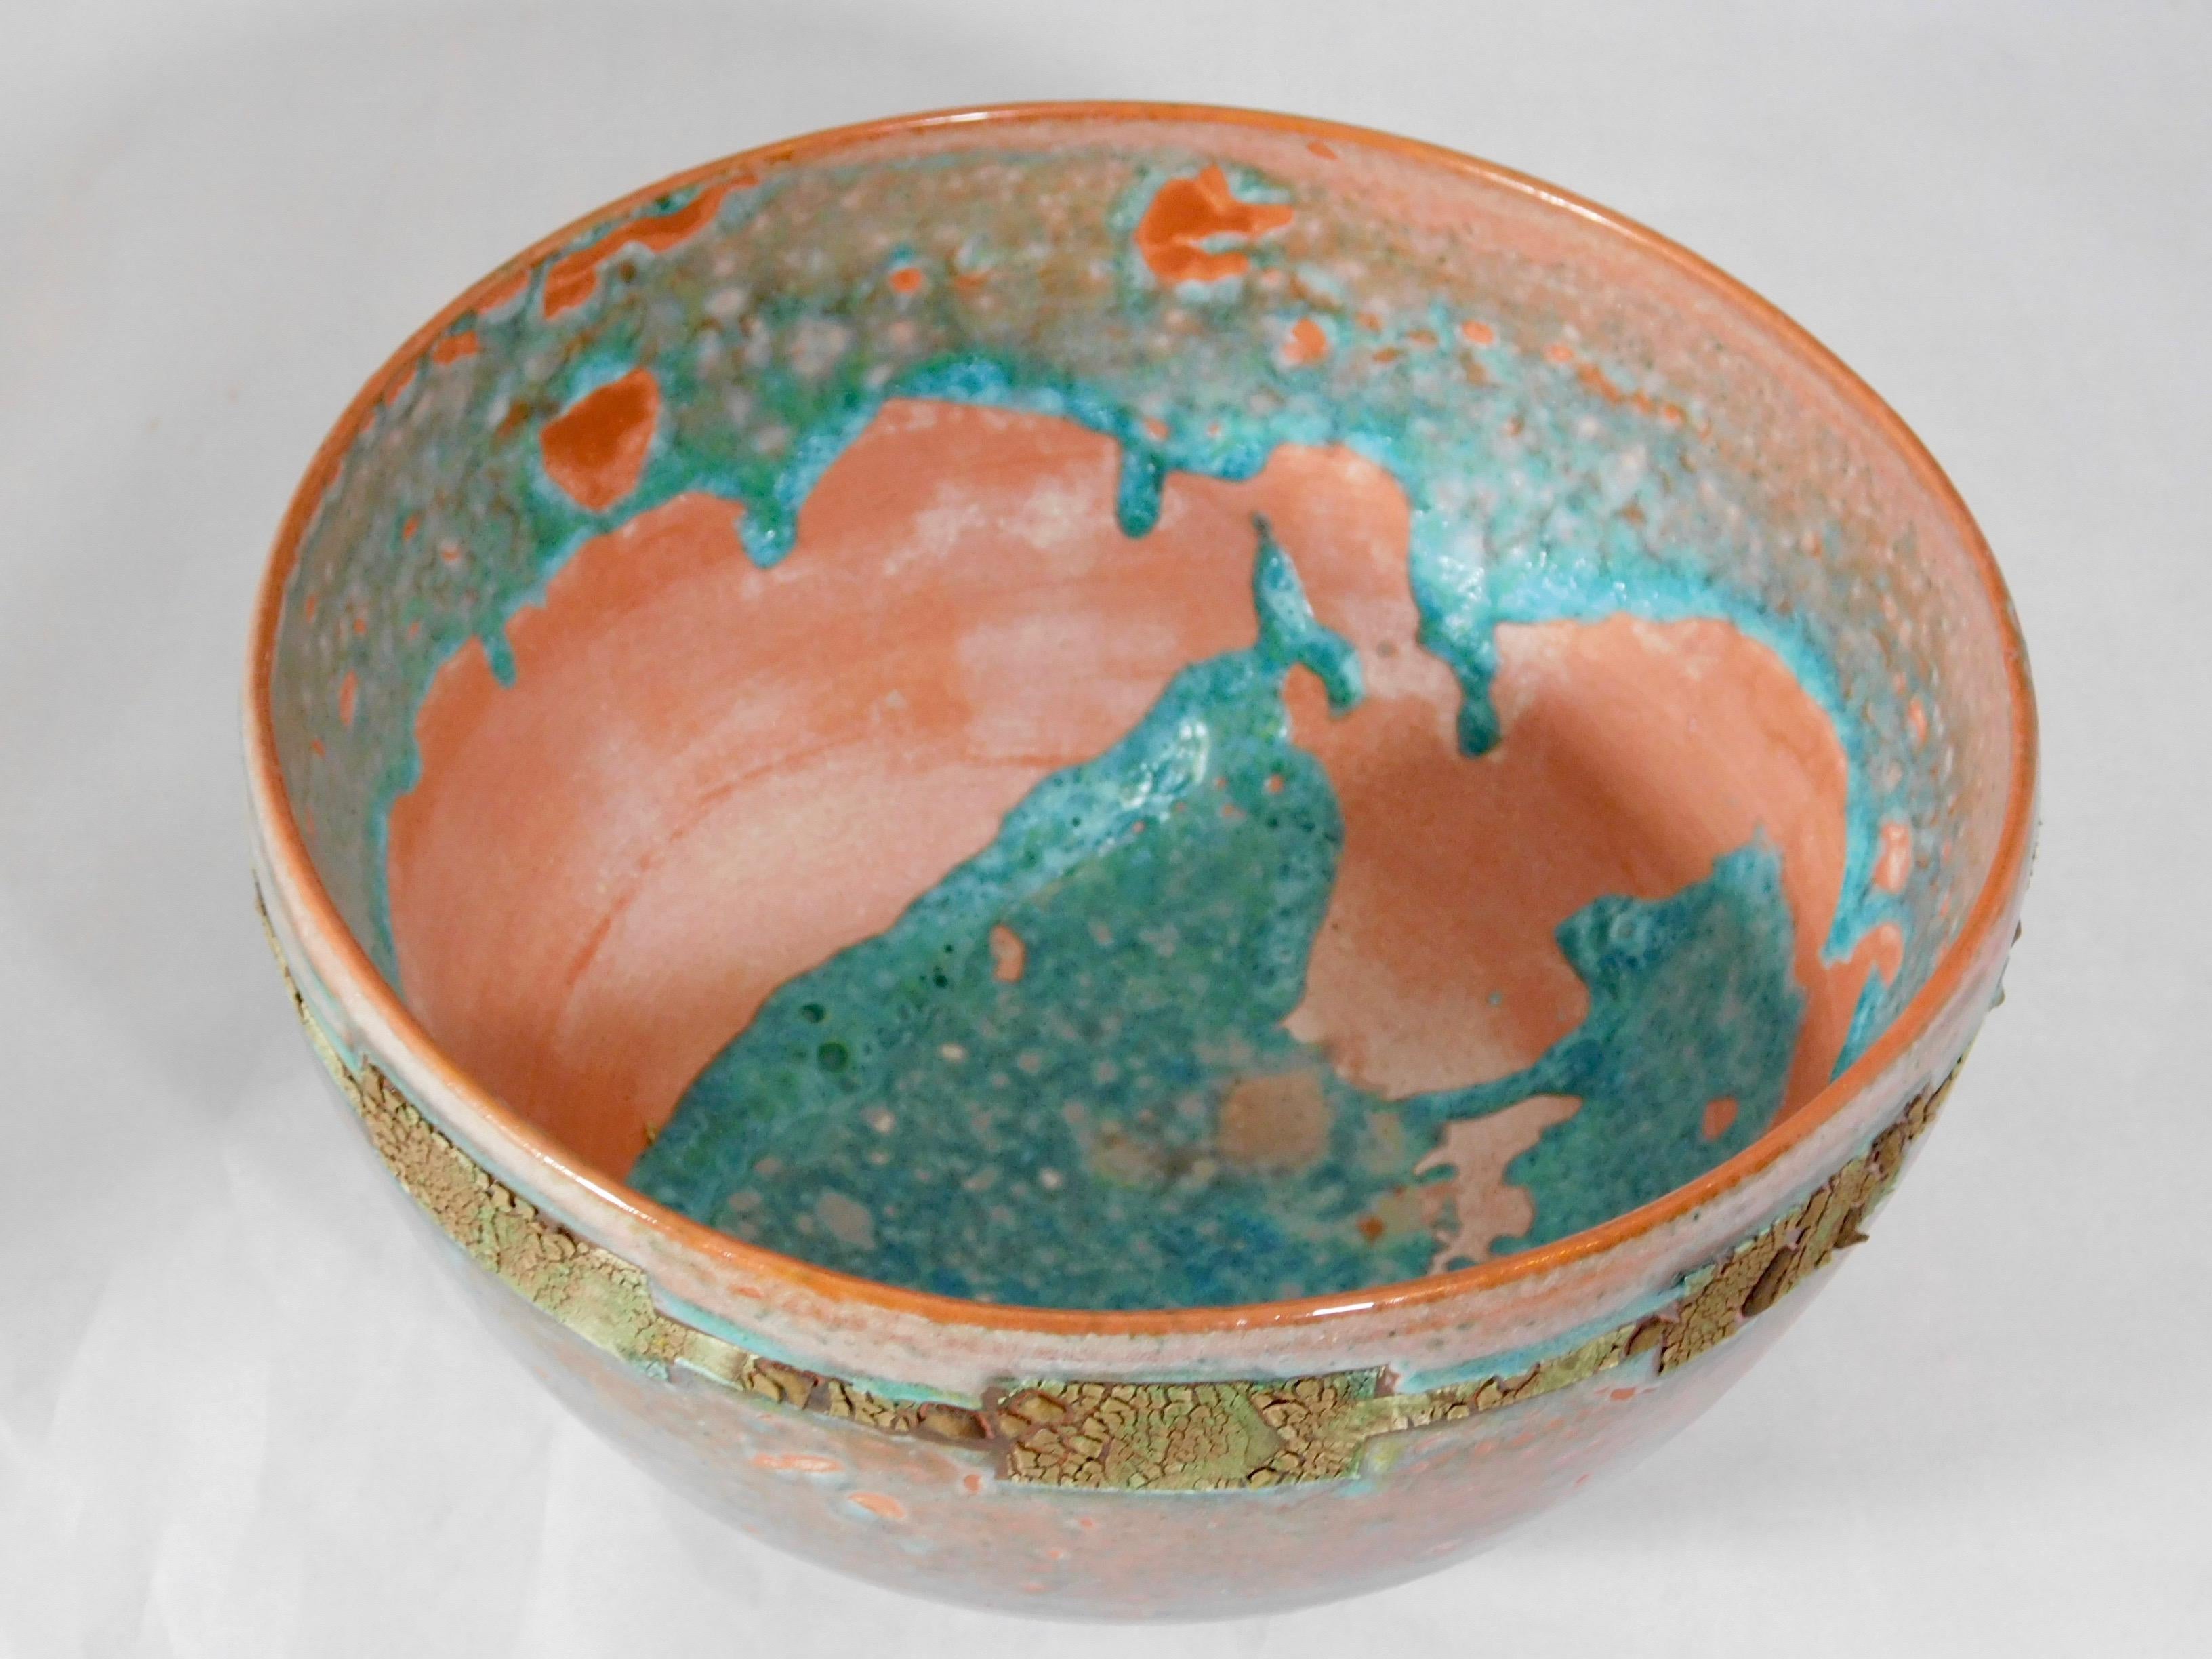 American Verdugo Woodlands Earthenware Bowl by Andrew Wilder, 2018